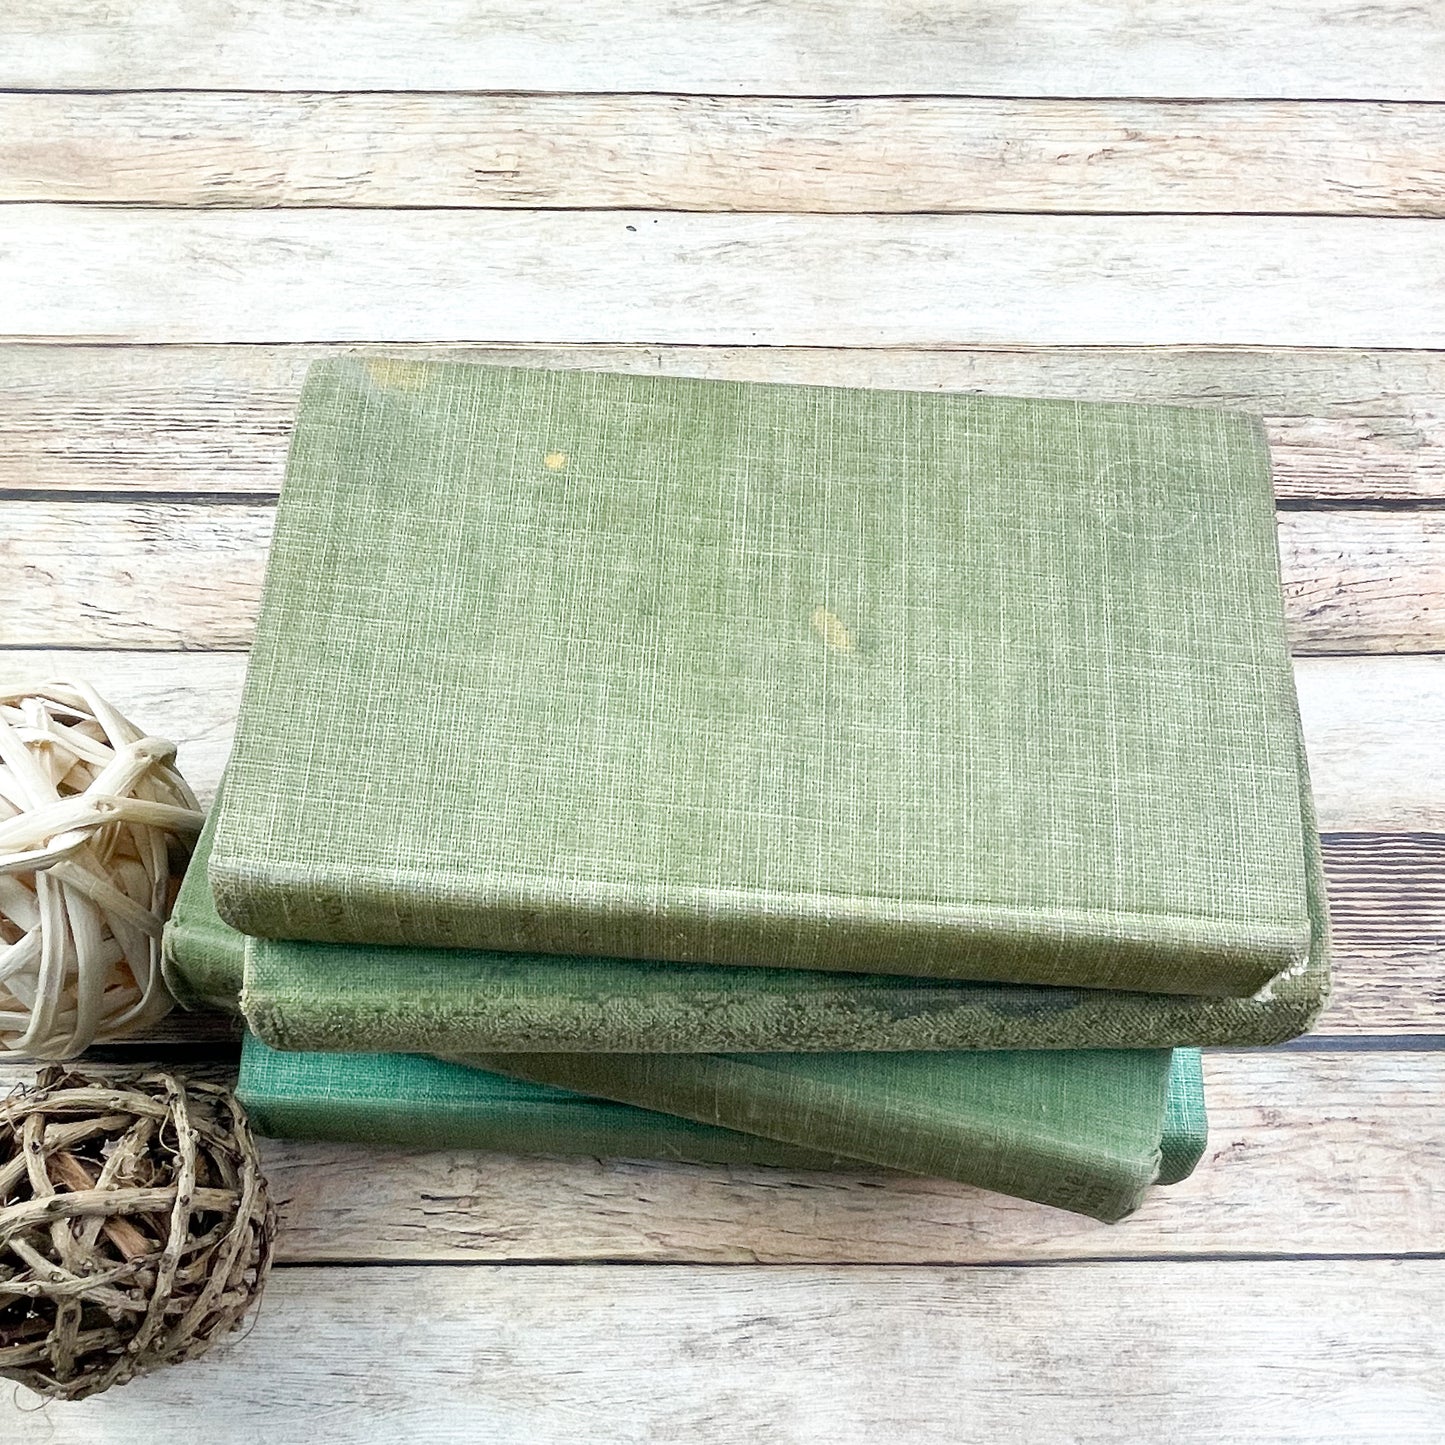 Vintage Green Books for Home Accents